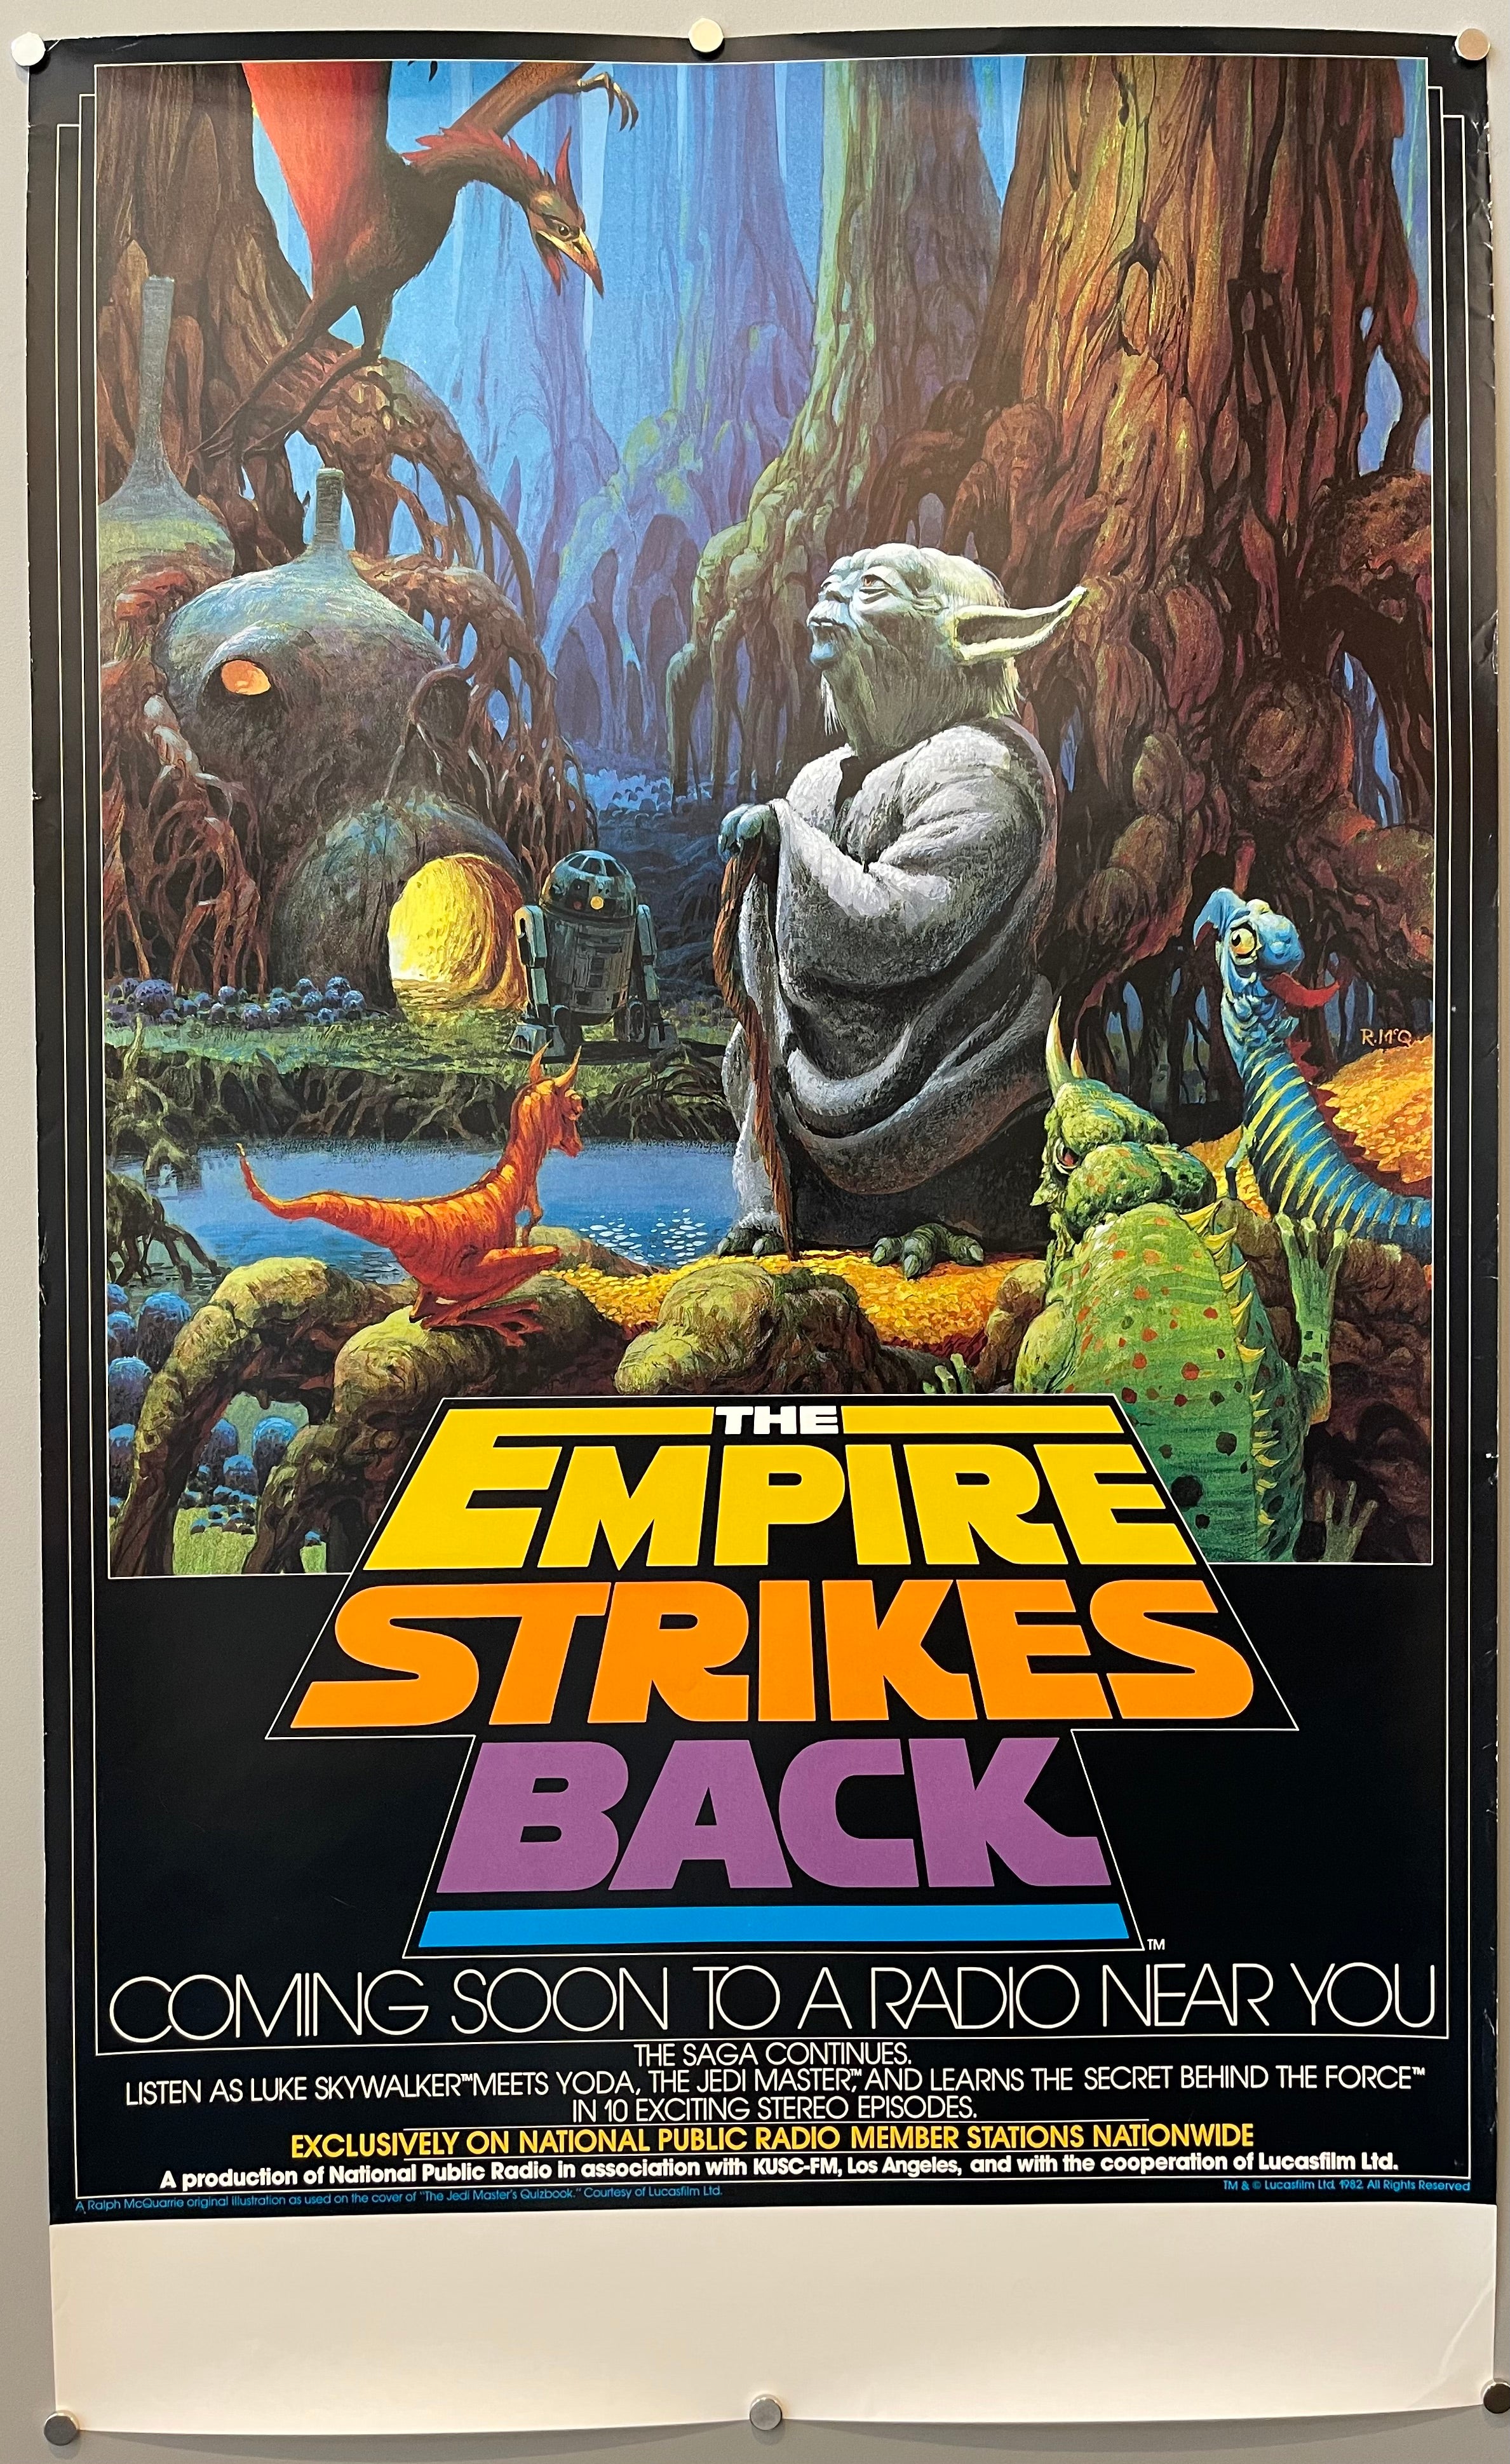 The Empire Strikes – You Radio Museum Near Soon to Coming a Poster Back Poster